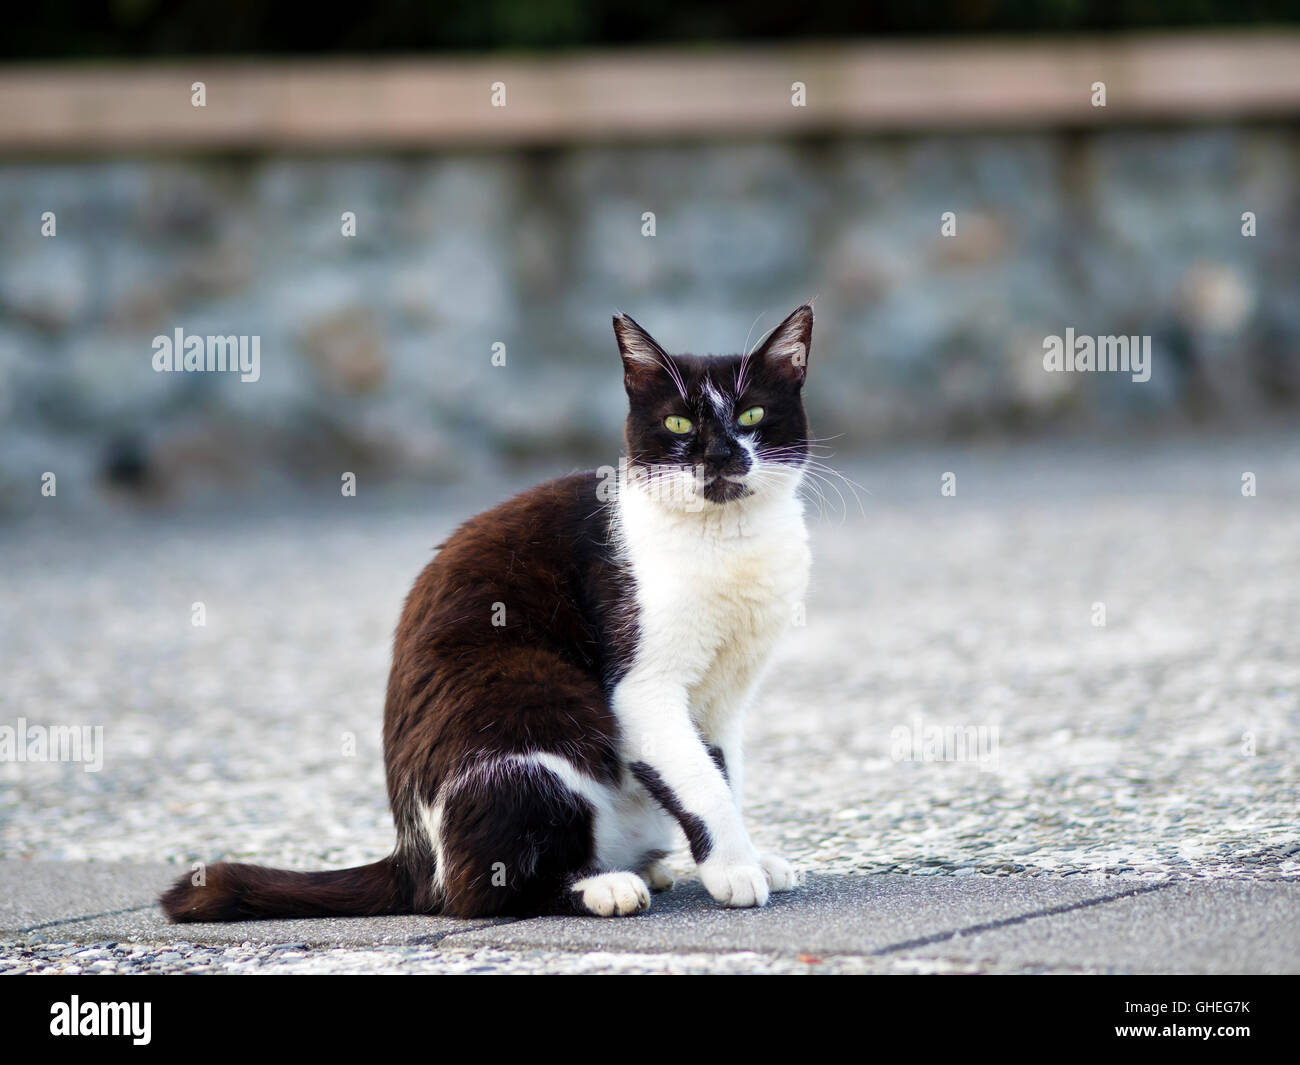 black white domestic cat lying on ground with bokeh background Stock Photo